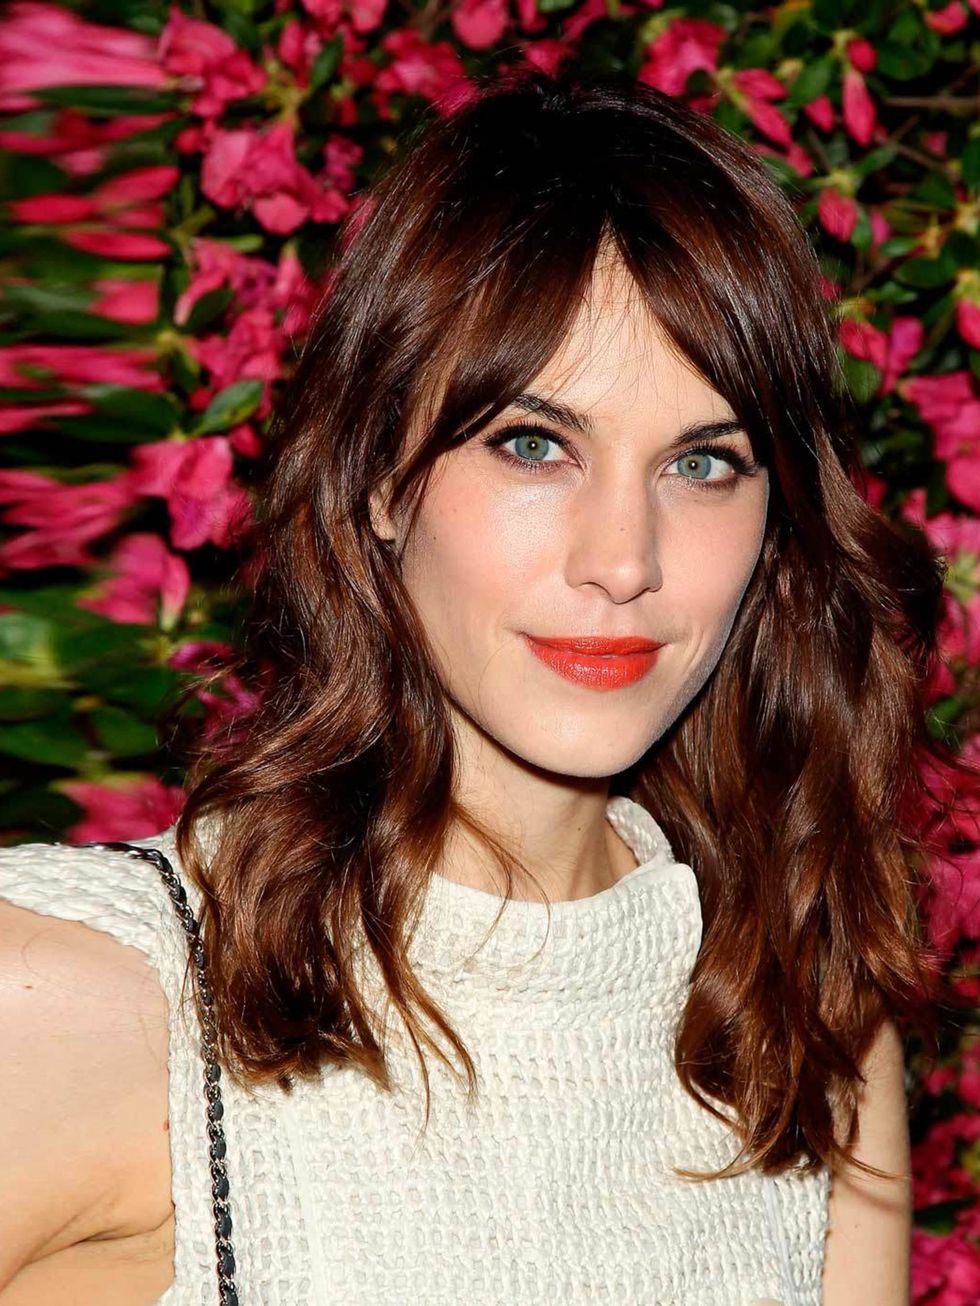 &lt;p&gt;Leisa Barnett, News &amp; Social Media Editor, &lsquo;I like to think I could be an &lt;a href=&quot;http://www.elleuk.com/star-style/celebrity-style-files/alexa-chung-s-style-file&quot;&gt;Alexa Chung&lt;/a&gt;. I&#039;ve got the colour, the len